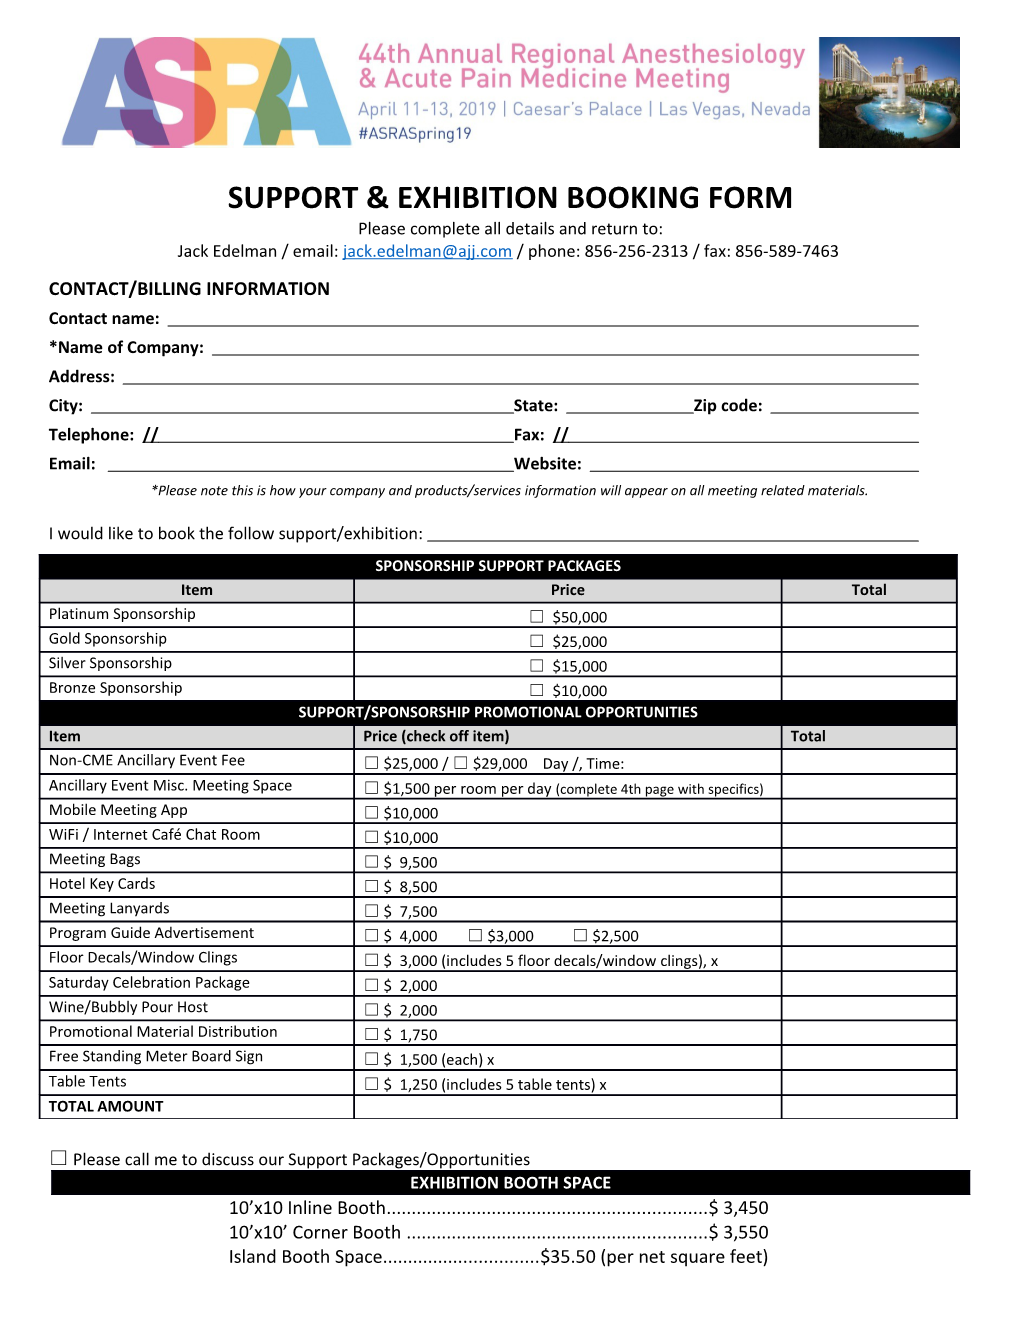 Support & Exhibition Booking Form